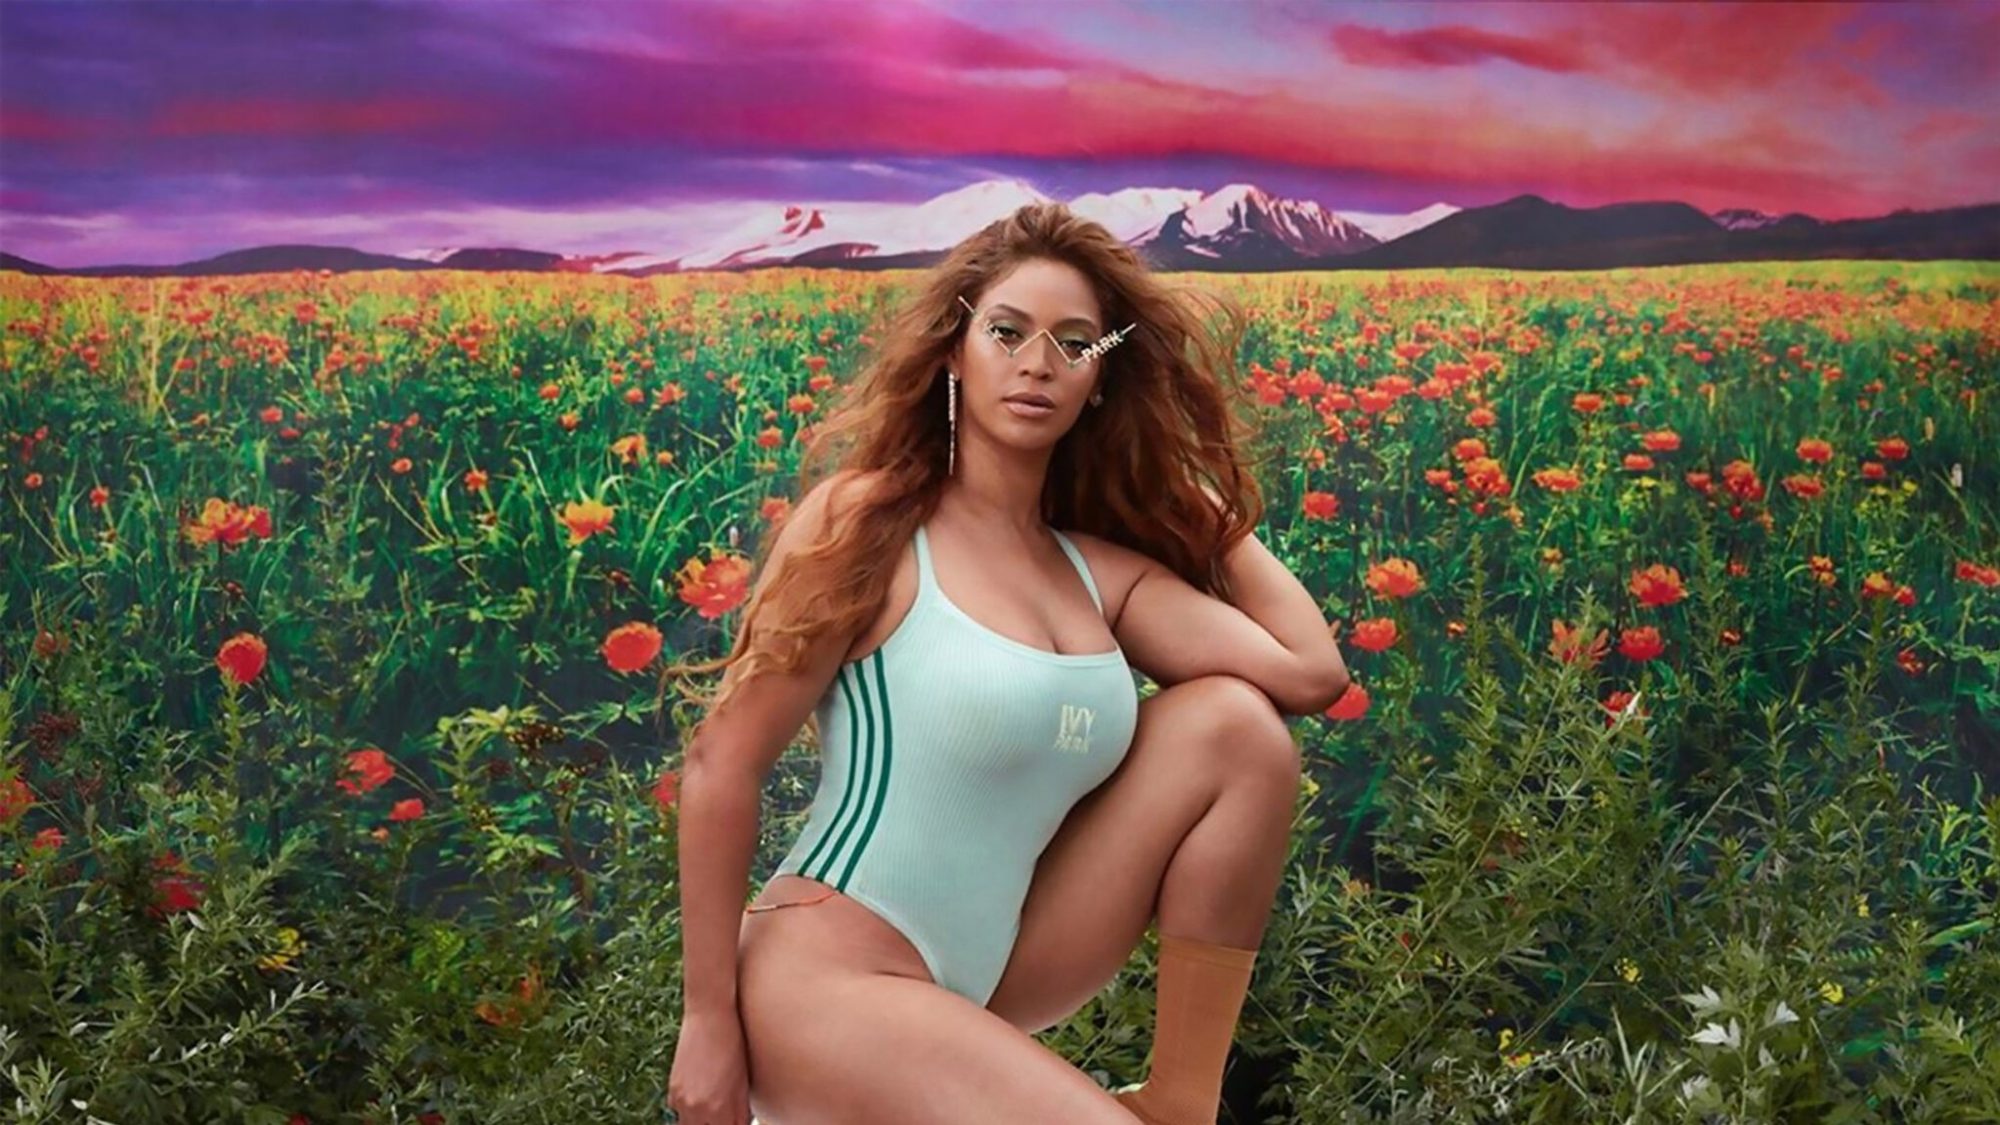 https://www.footshop.eu/blog/wp-content/uploads/2020/11/beyonce-oozes-specs-appeal-in-mint-swimsuit-and-eccentric-eyewear-for-ivy-park-collection-2048x1519-1-2000x1125.jpg